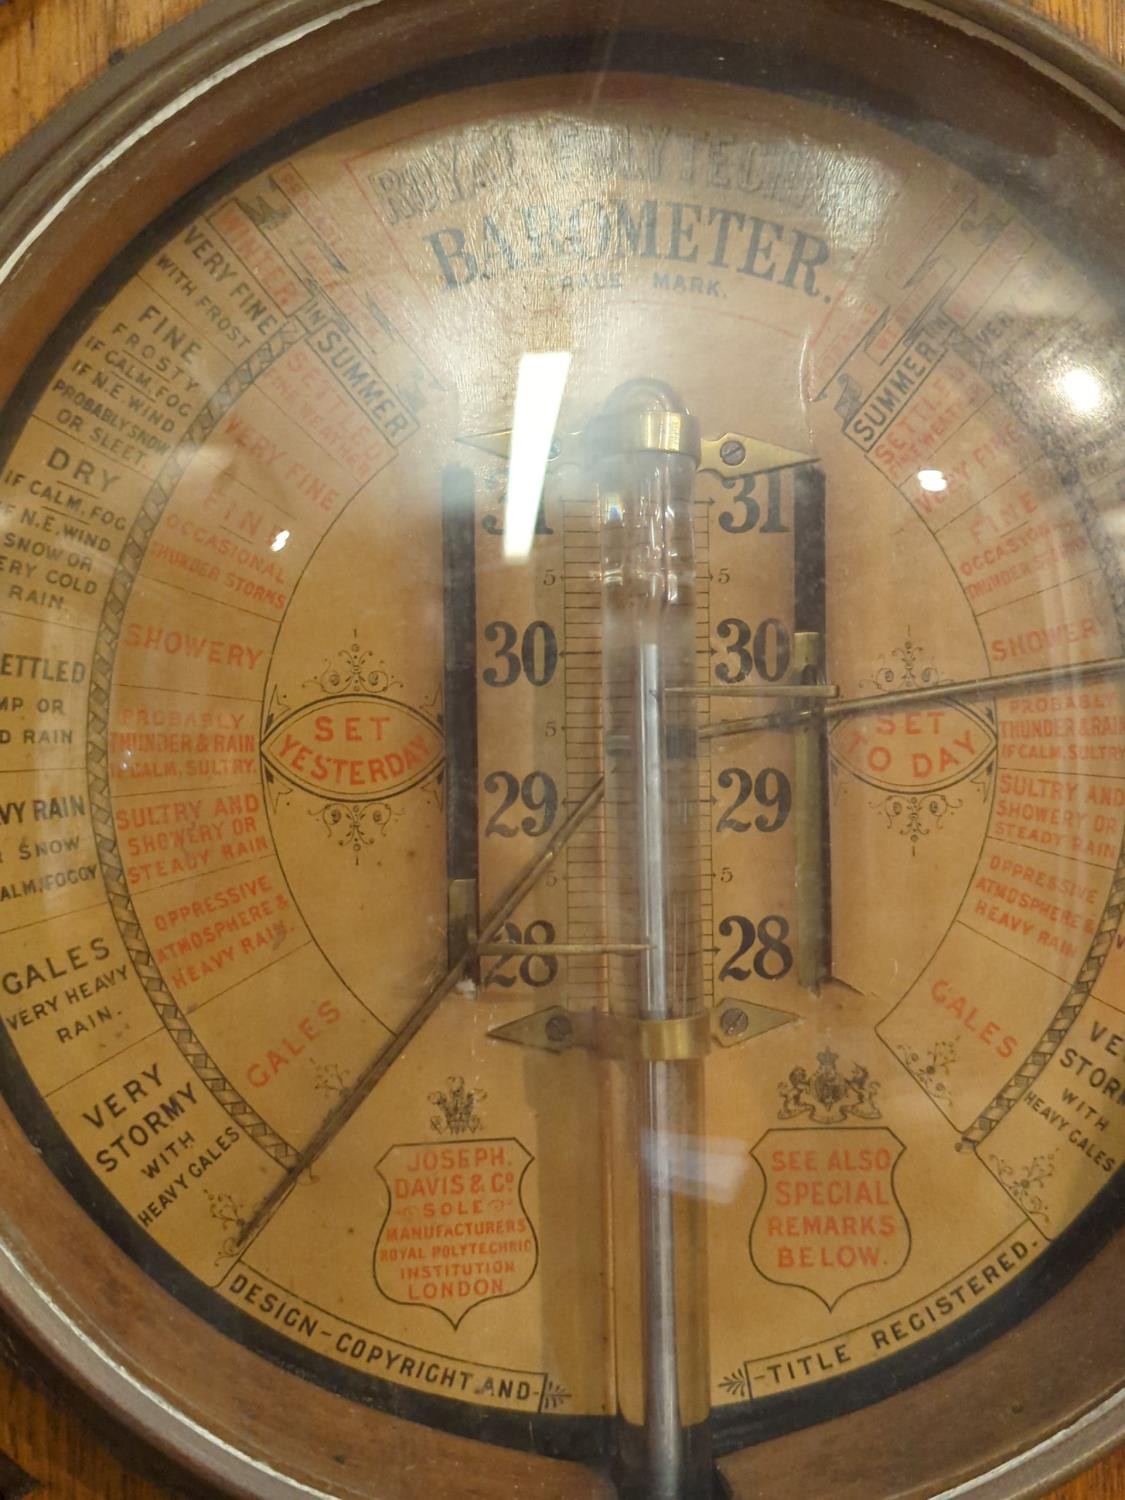 Admiral Fitzroy Royal Polytechnic Barometer . Has reference labels depicting Admiral Fitzroy's Speci - Image 2 of 4